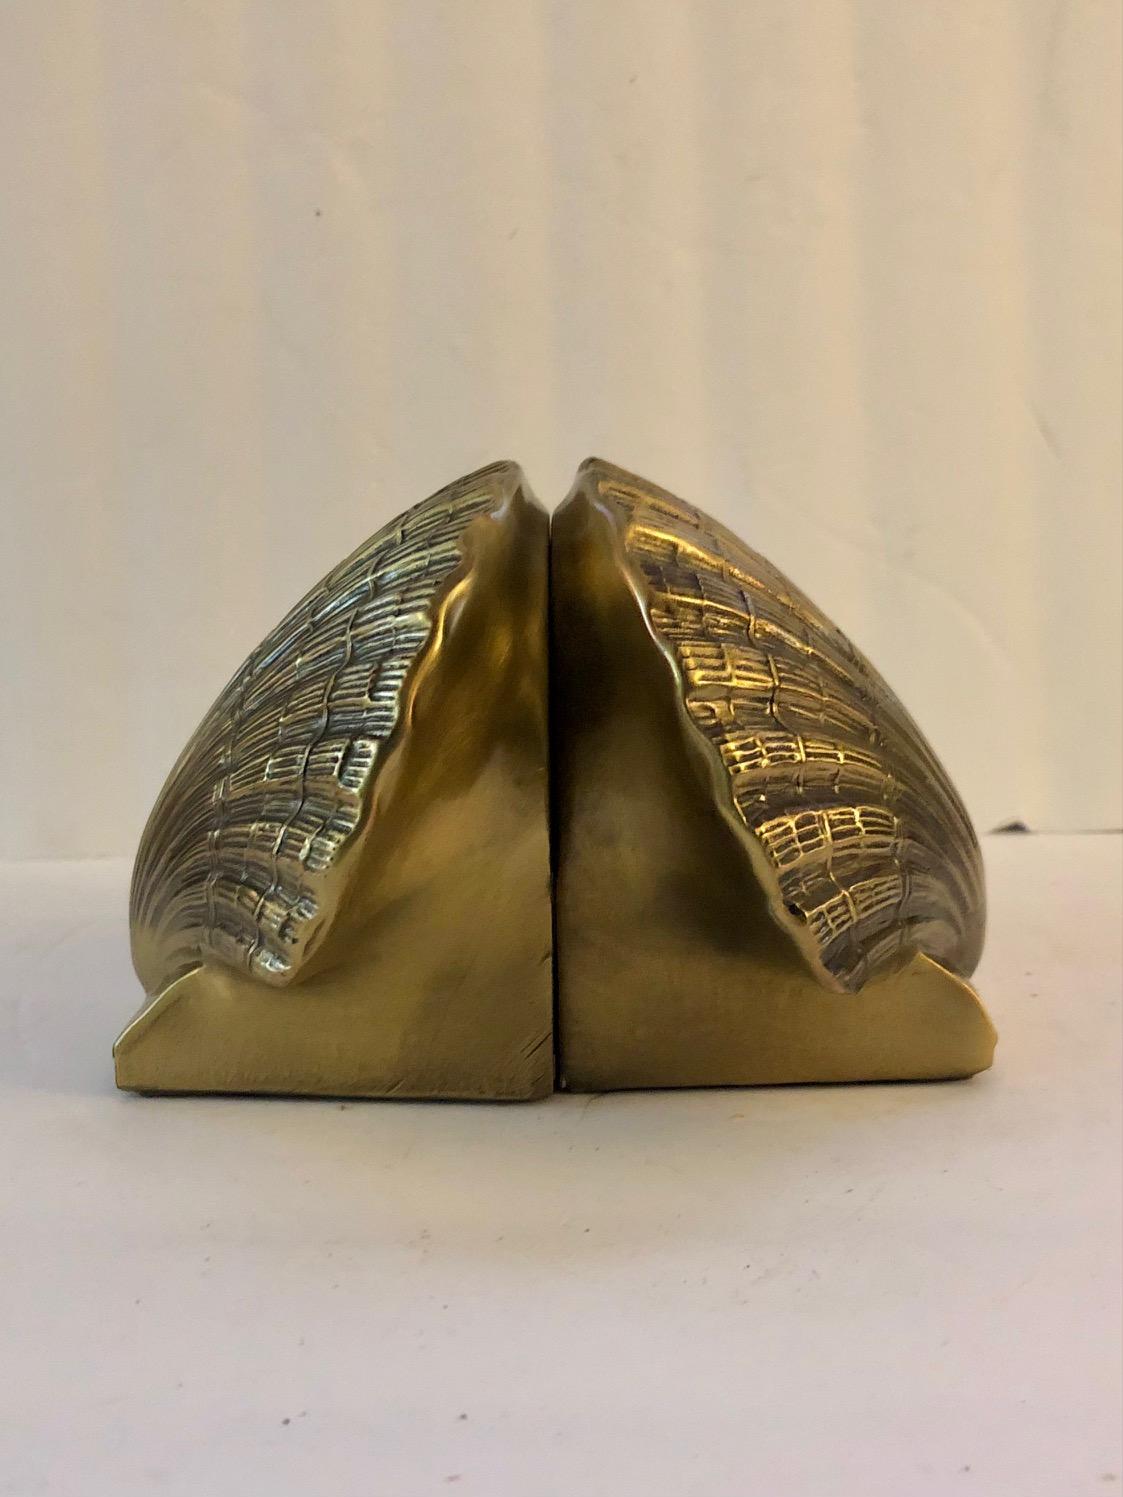 Shop Beautiful solid brass shell bookends